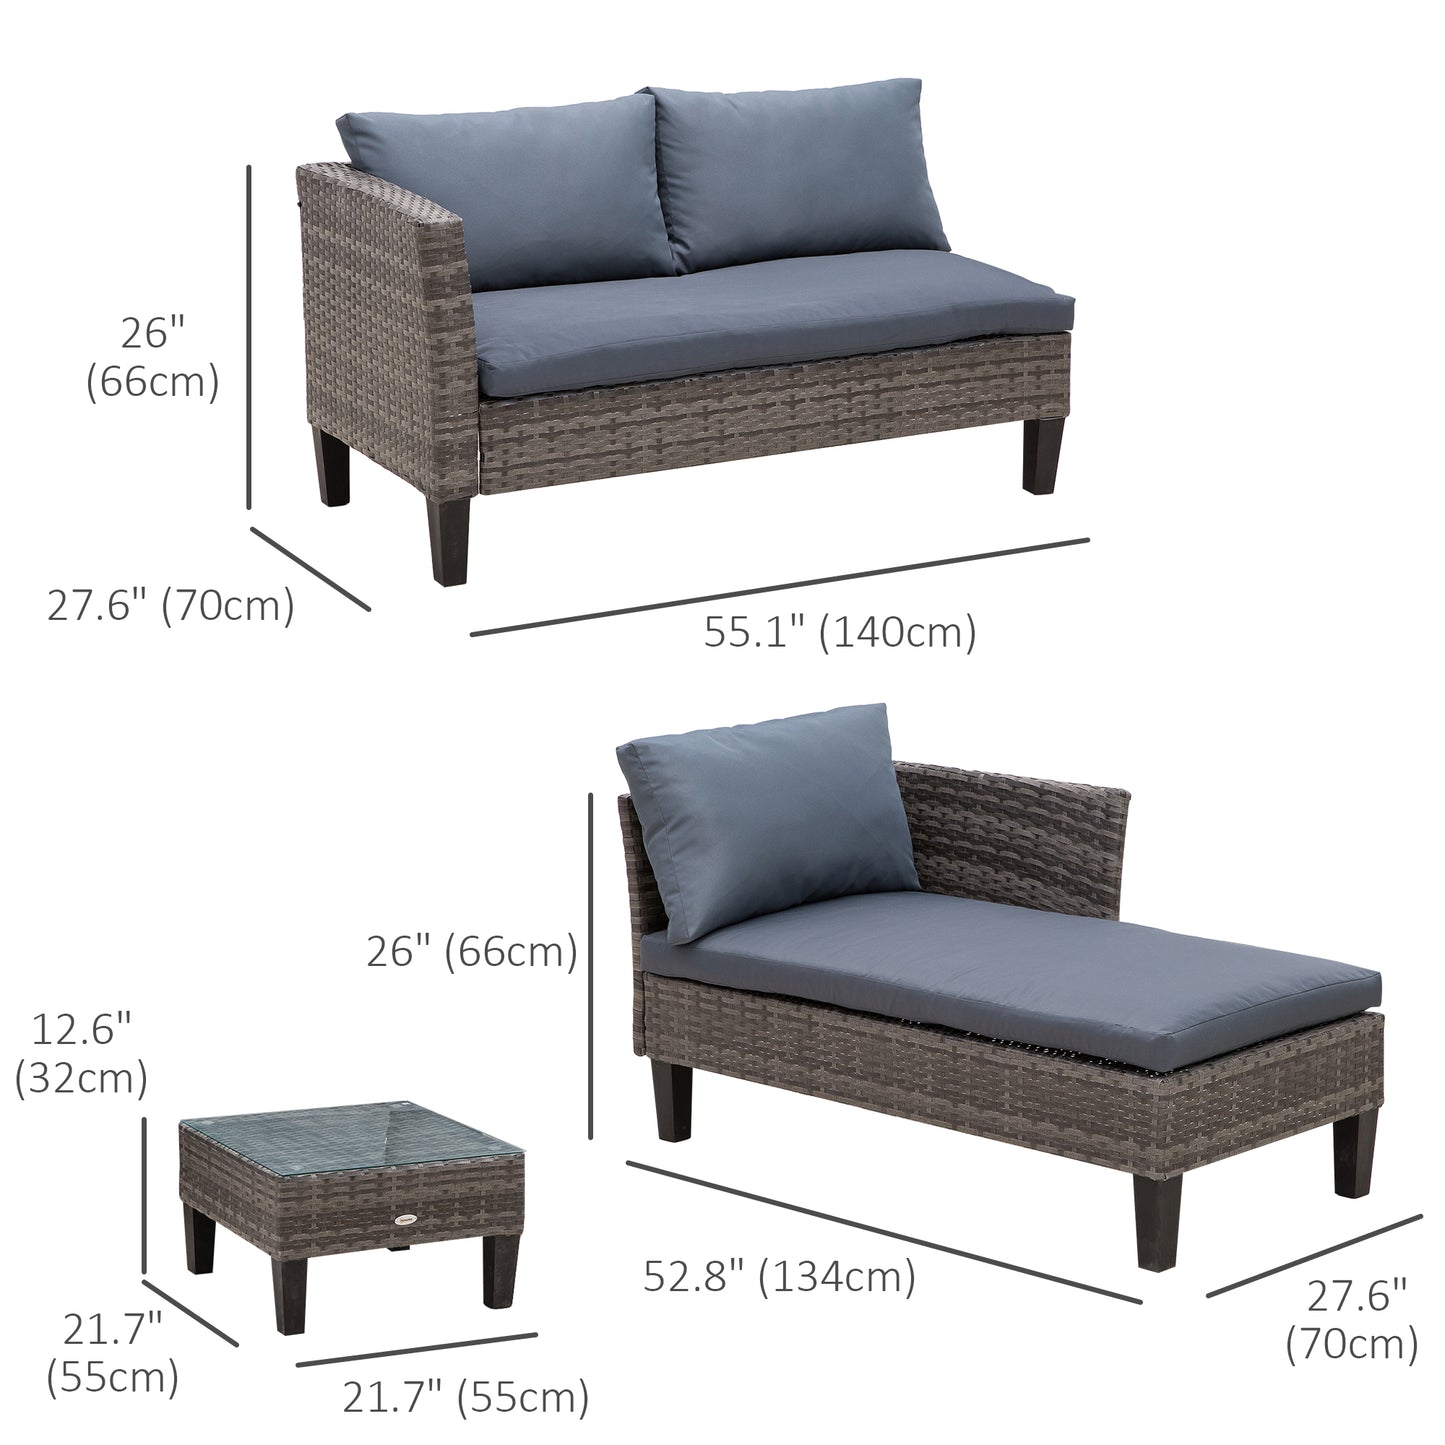 Outsunny 3 Piece Wicker Patio Furniture Set Outdoor Sofa Set with Glass Tabletop, Cushions Metal Frame for Balcony, Patio, Grey